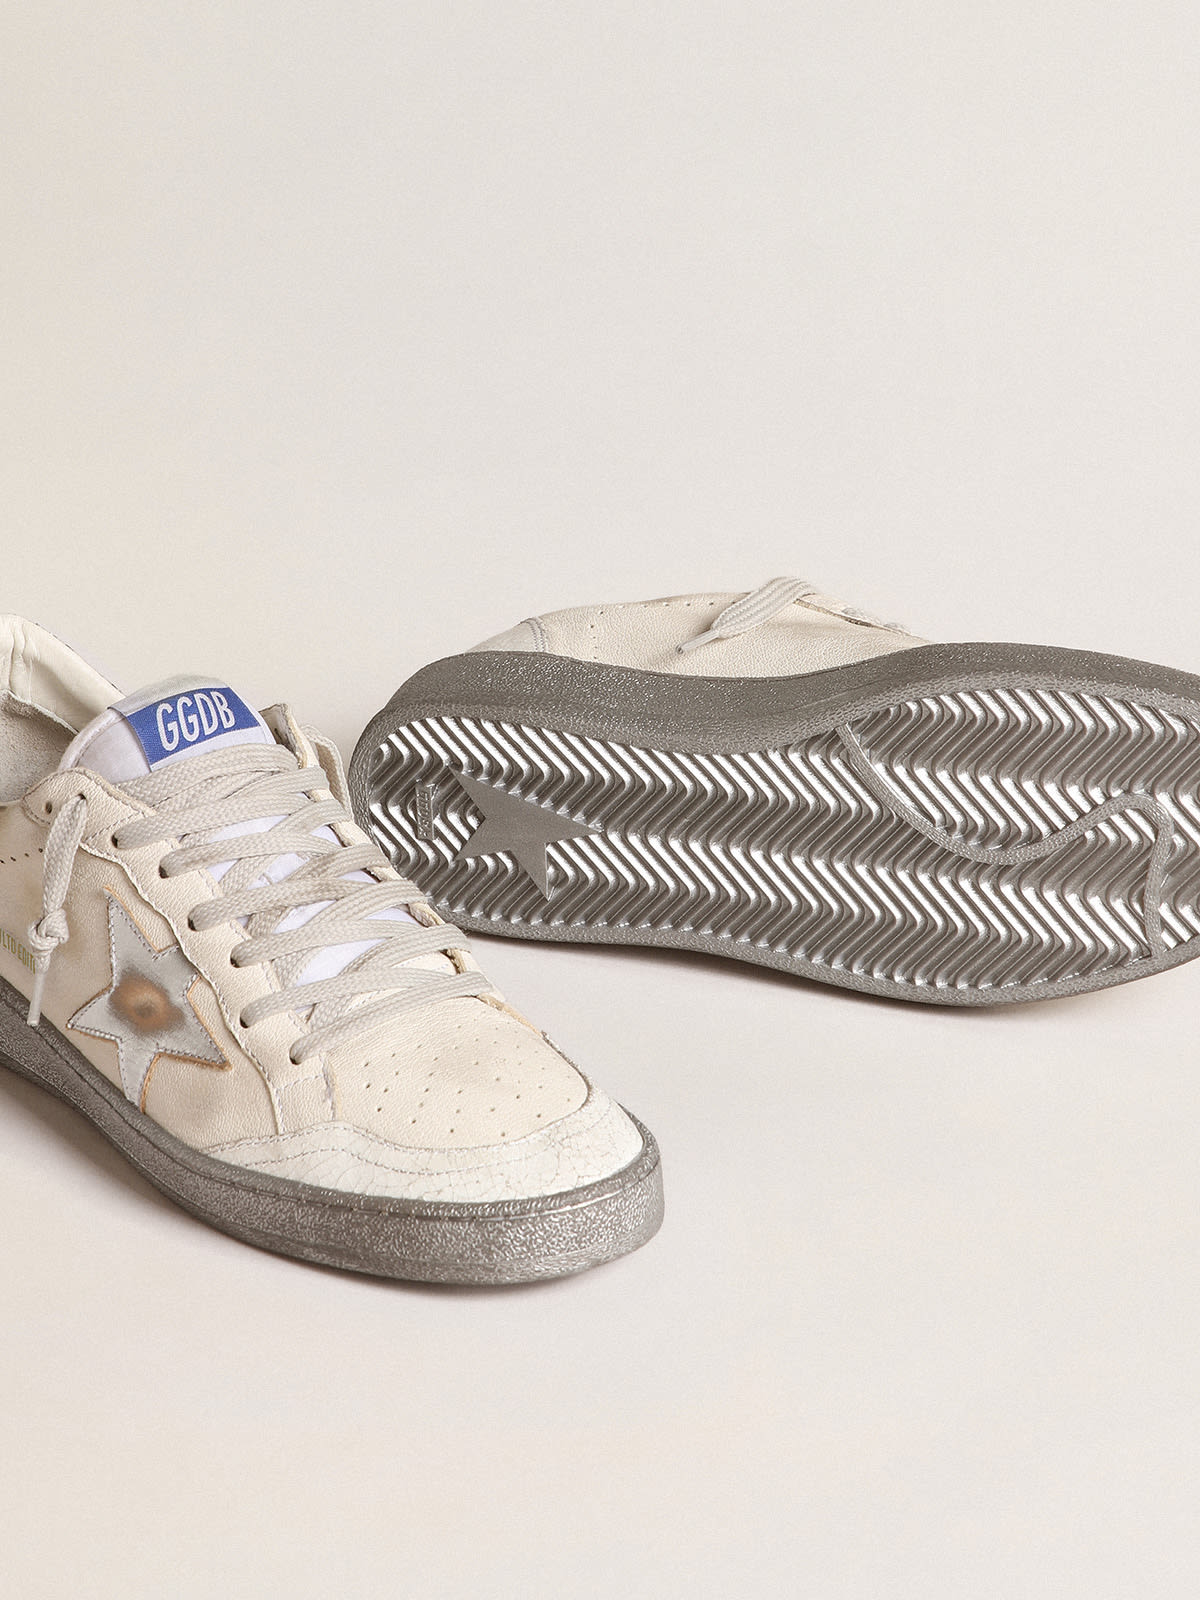 Golden Goose - Ball Star LTD sneakers with silver glitter heel tab and silver star in 